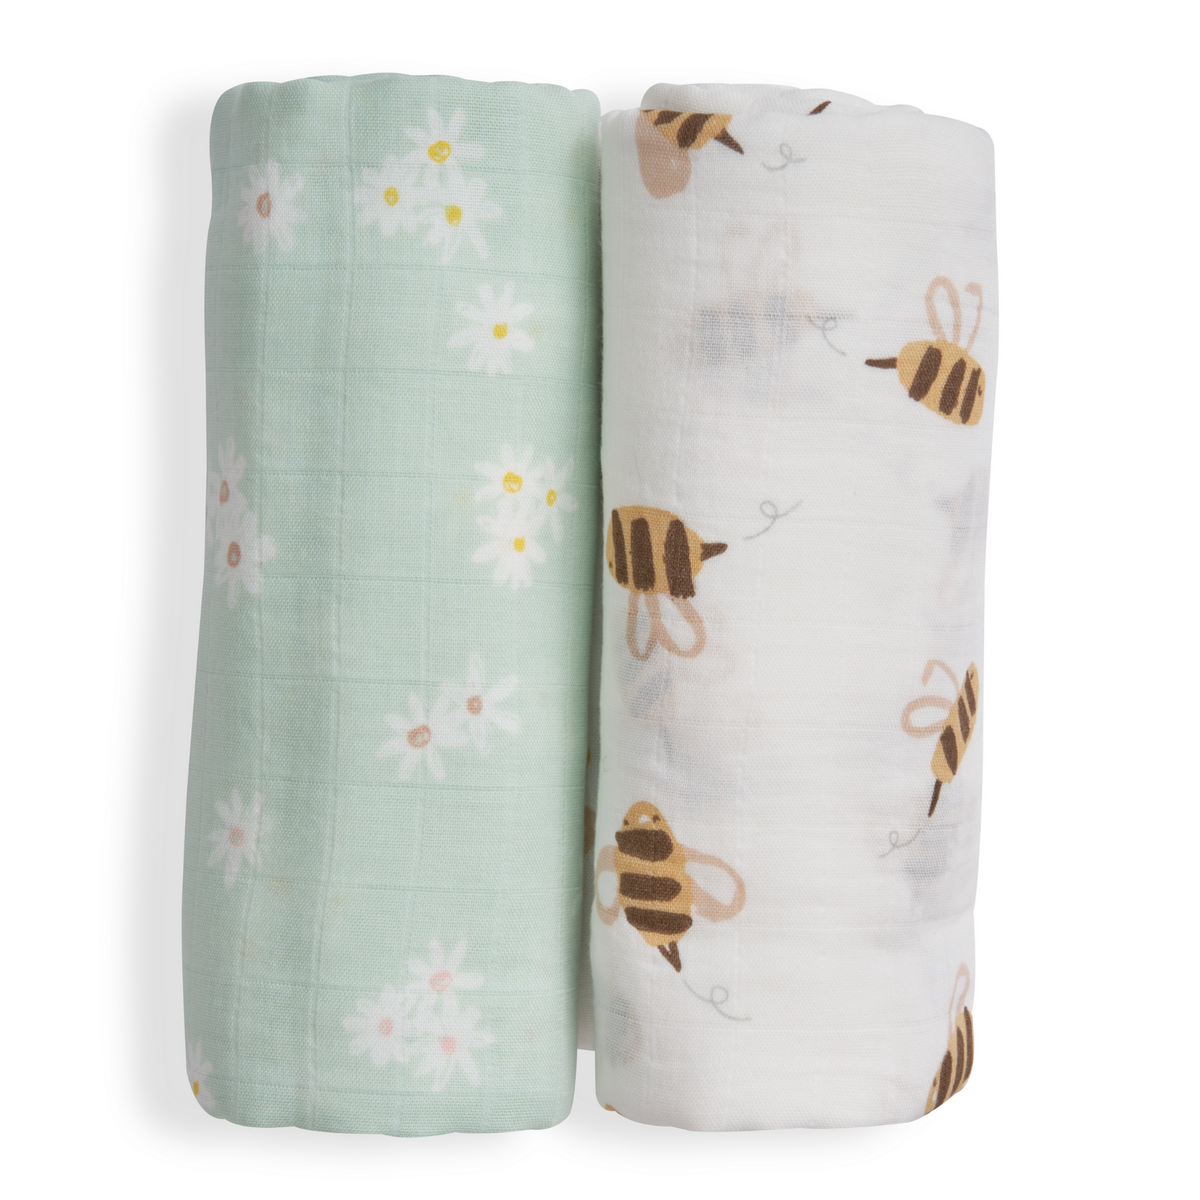 Muslin Swaddle Blankets - Pack of 2 - (Bee/Fruit/Daisy) - Canada Stock